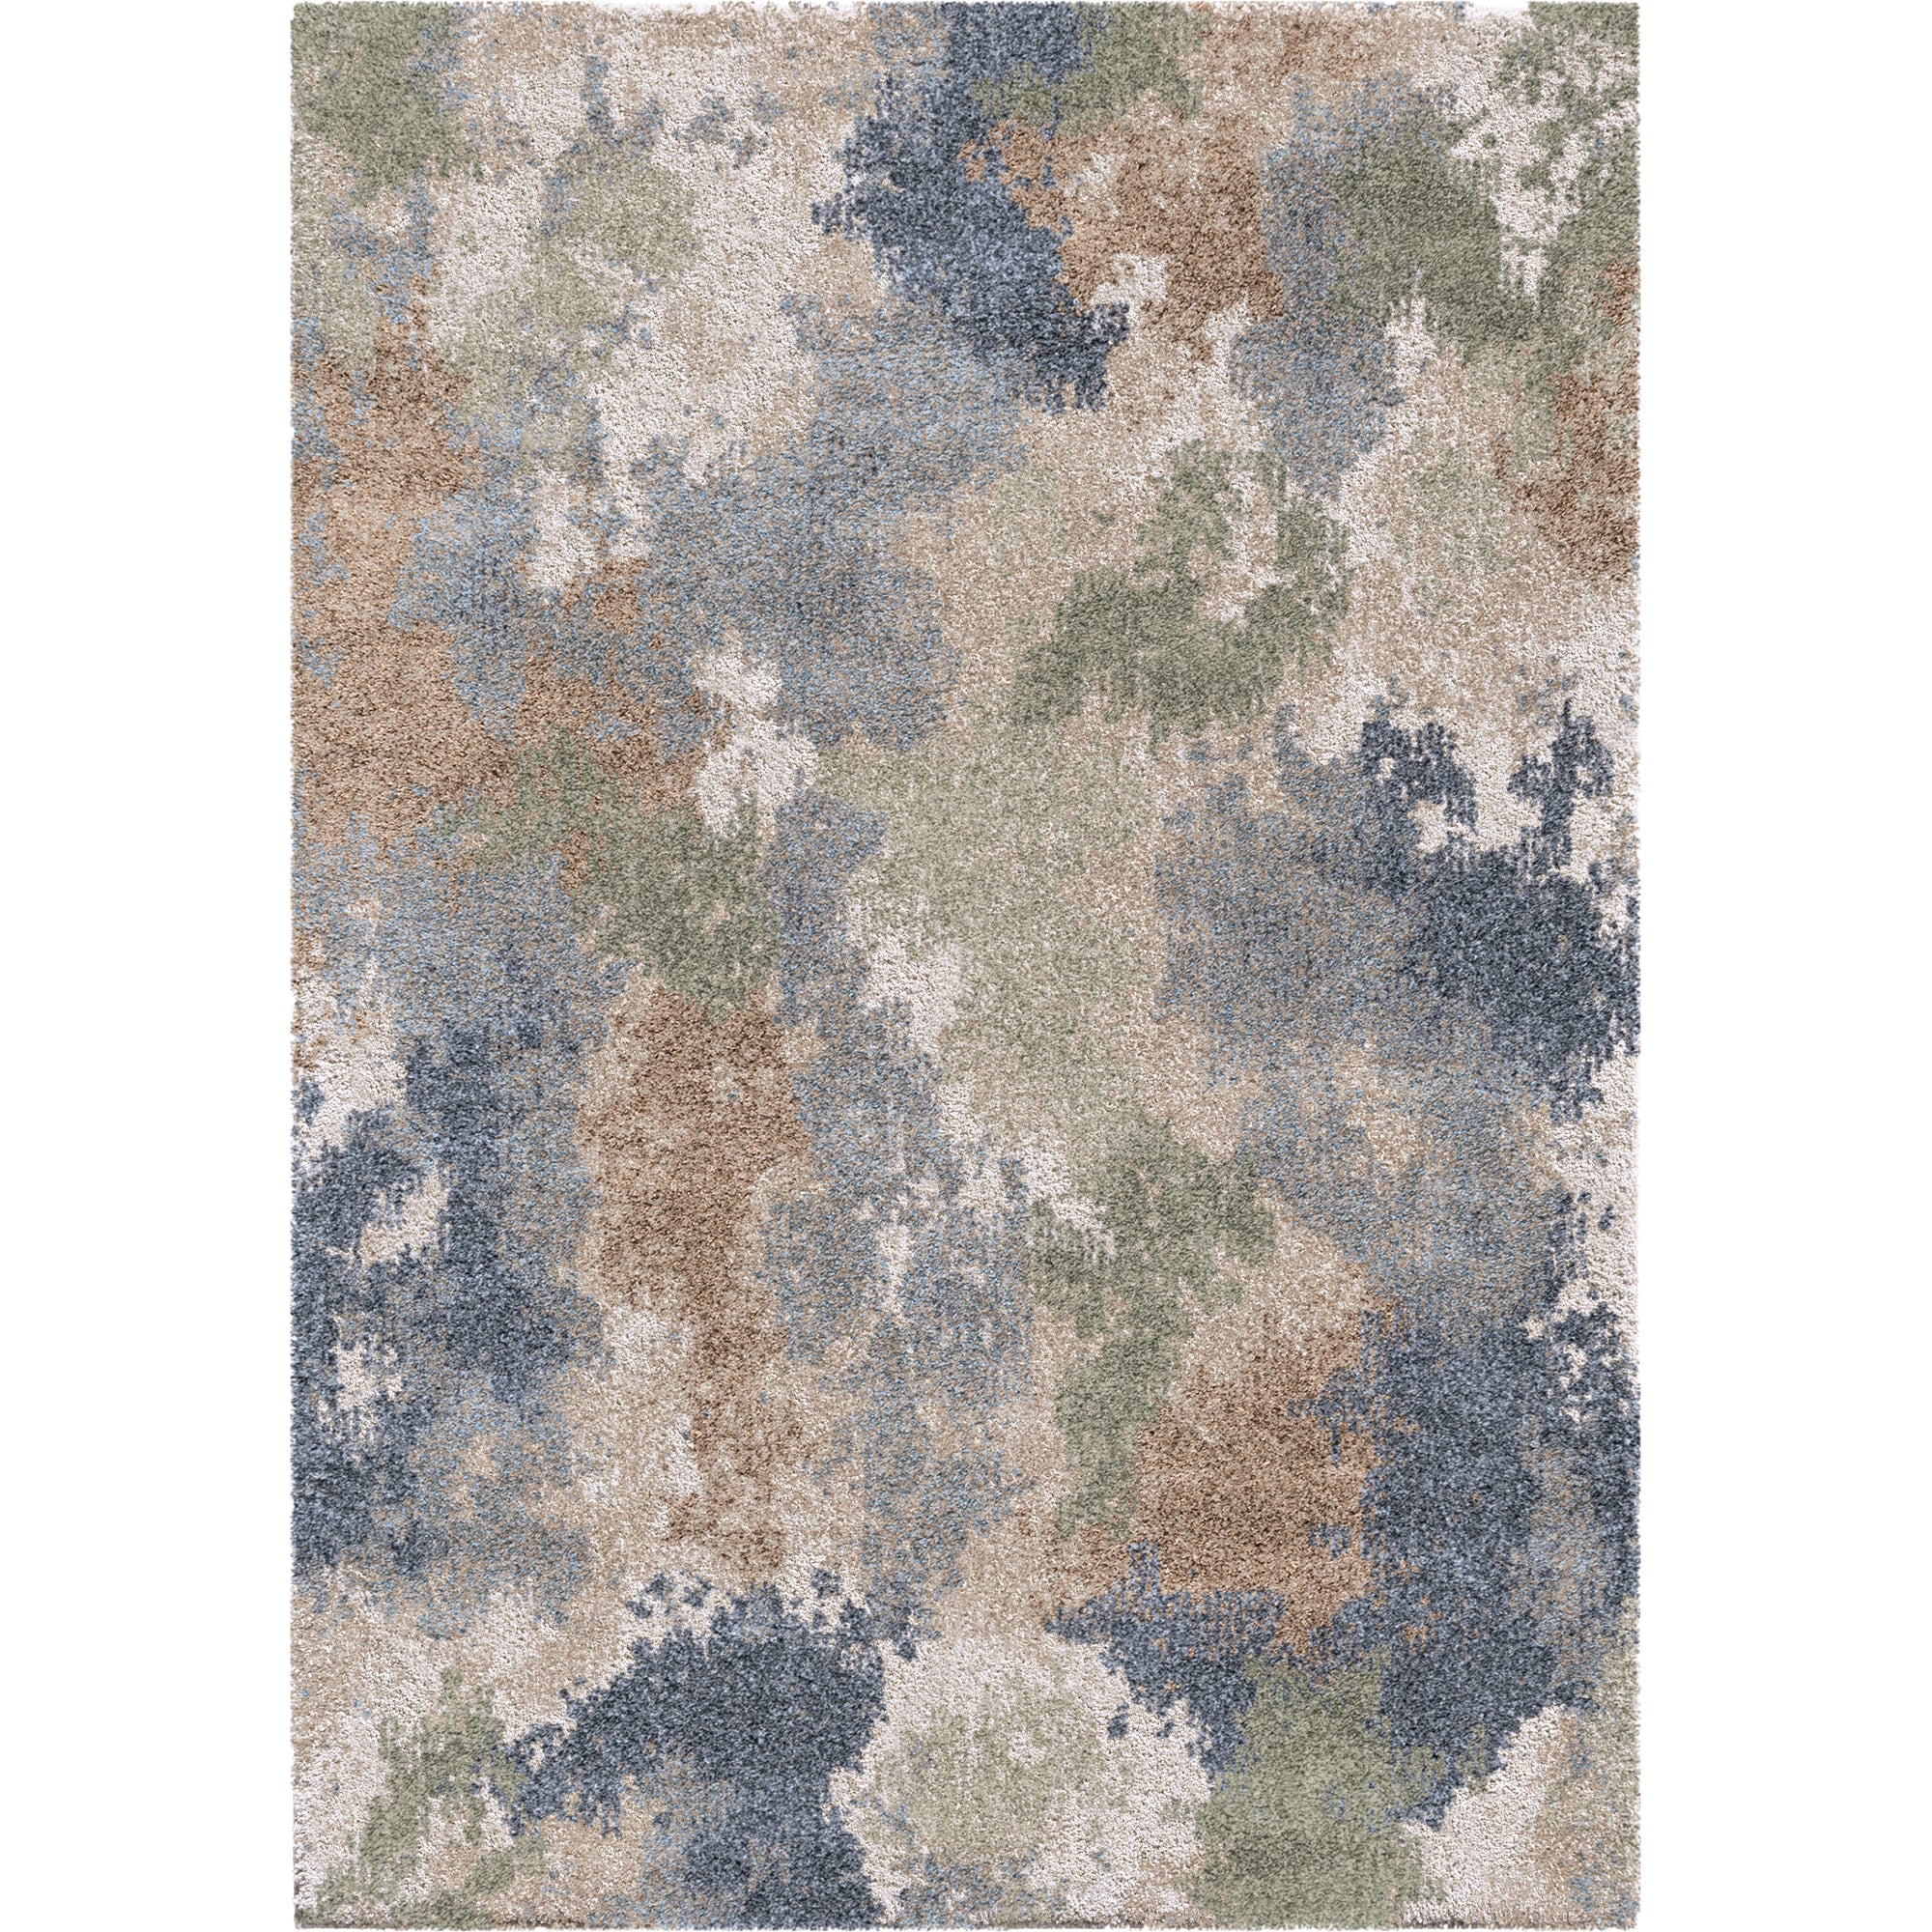 Palmetto Living Mystical Dreamy   Muted Blue Area Rug - 7'10" x 10'10"